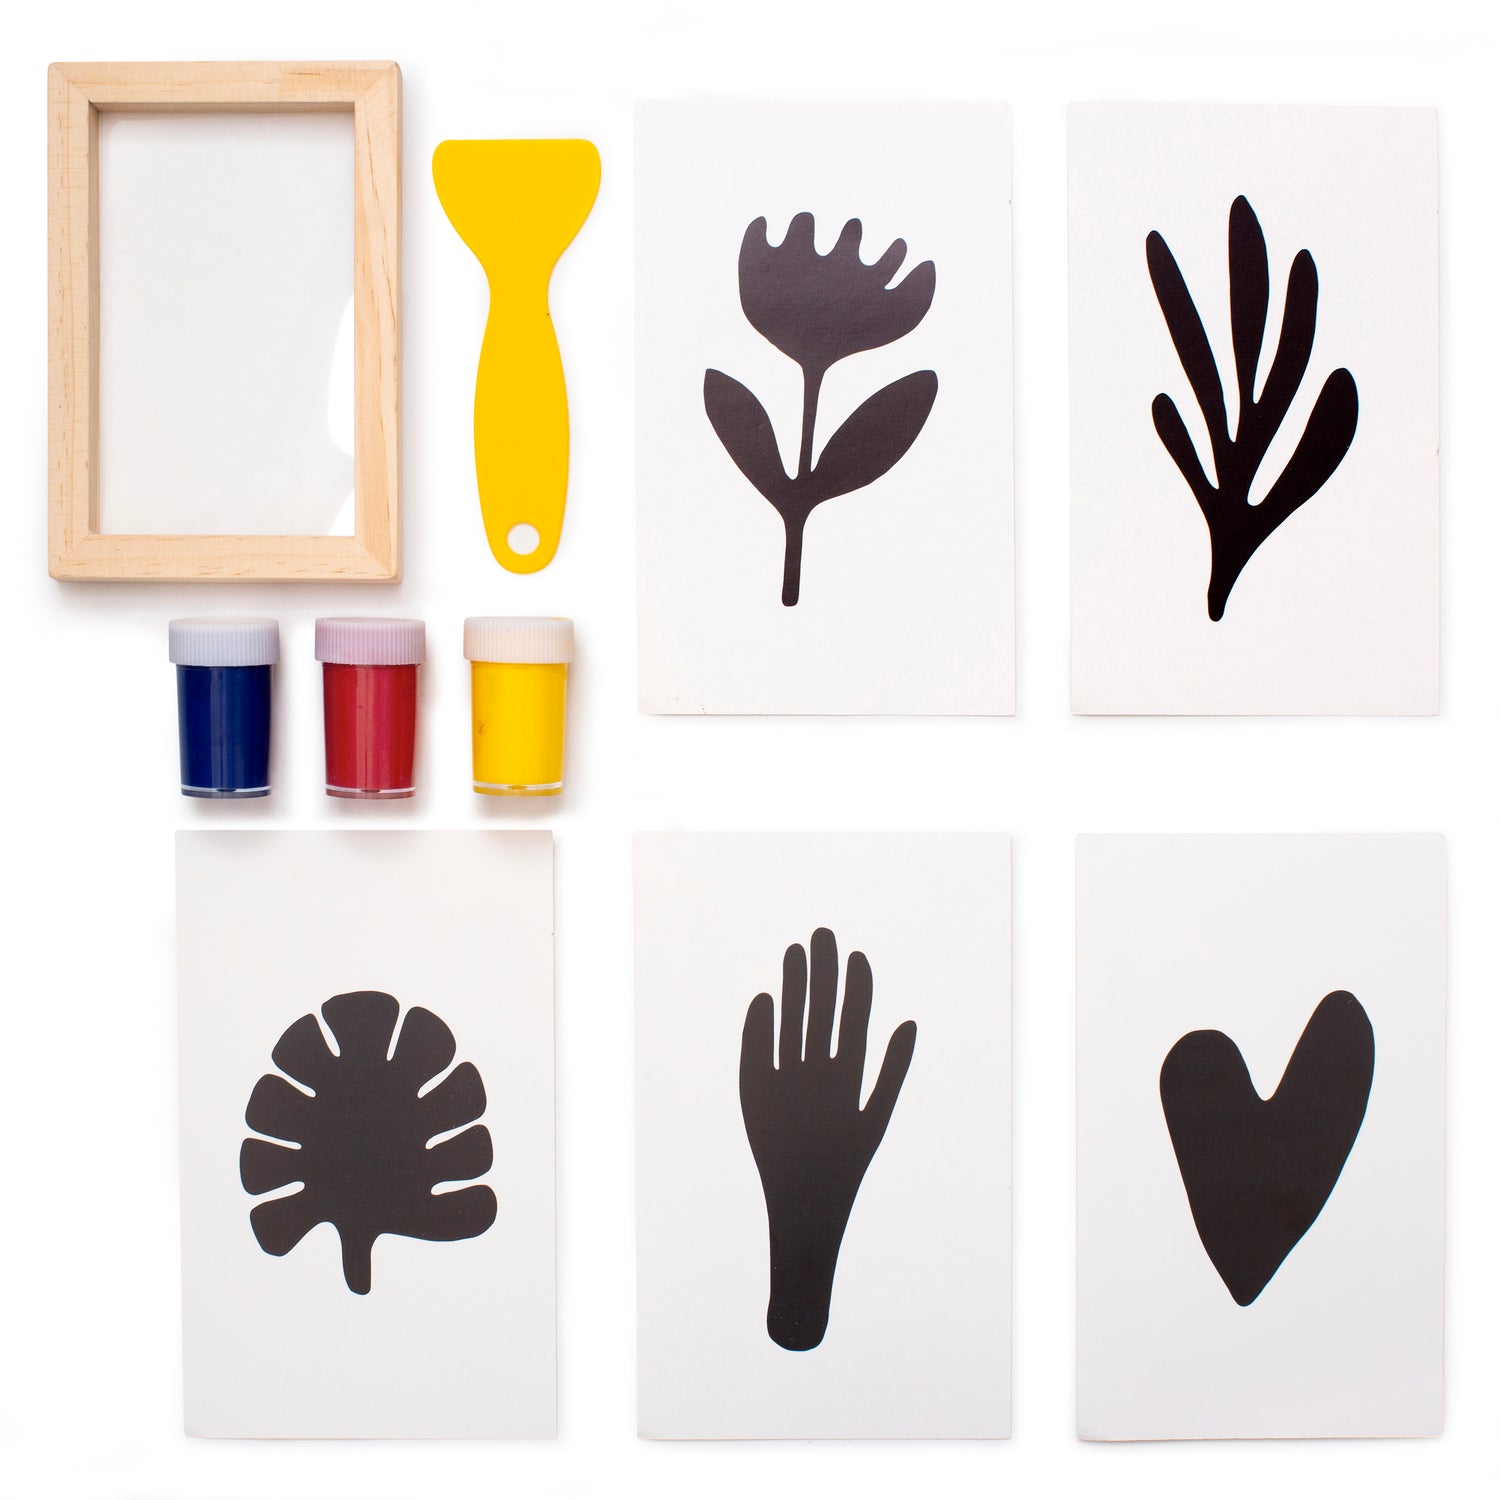 Crafter's Make Your Own Screen Prints